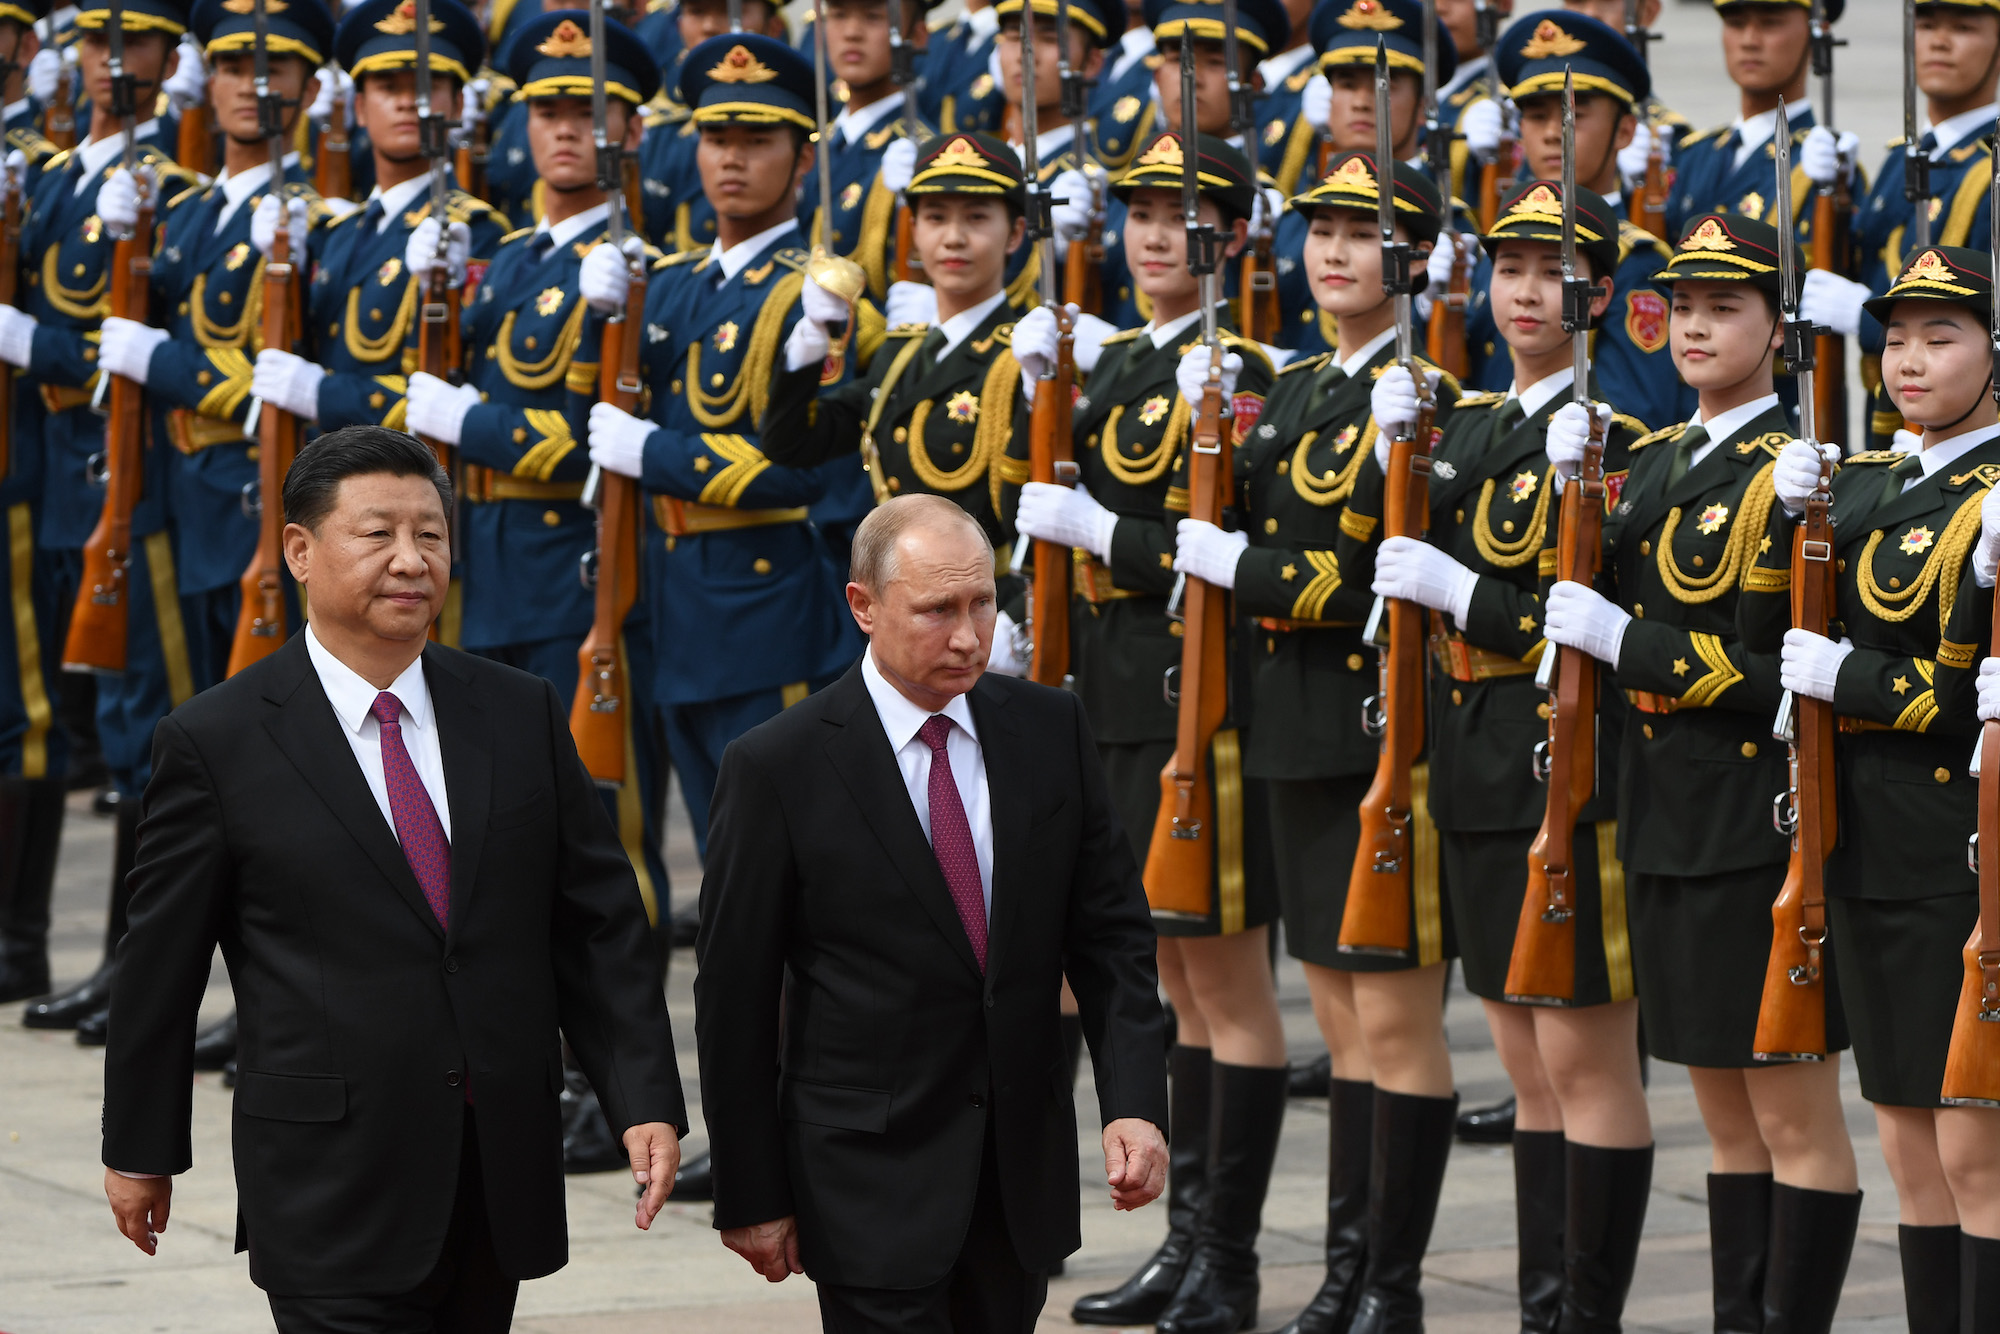 In June 2018, Putin and Xi Jinping reviewed the guard of honor in Beijing.